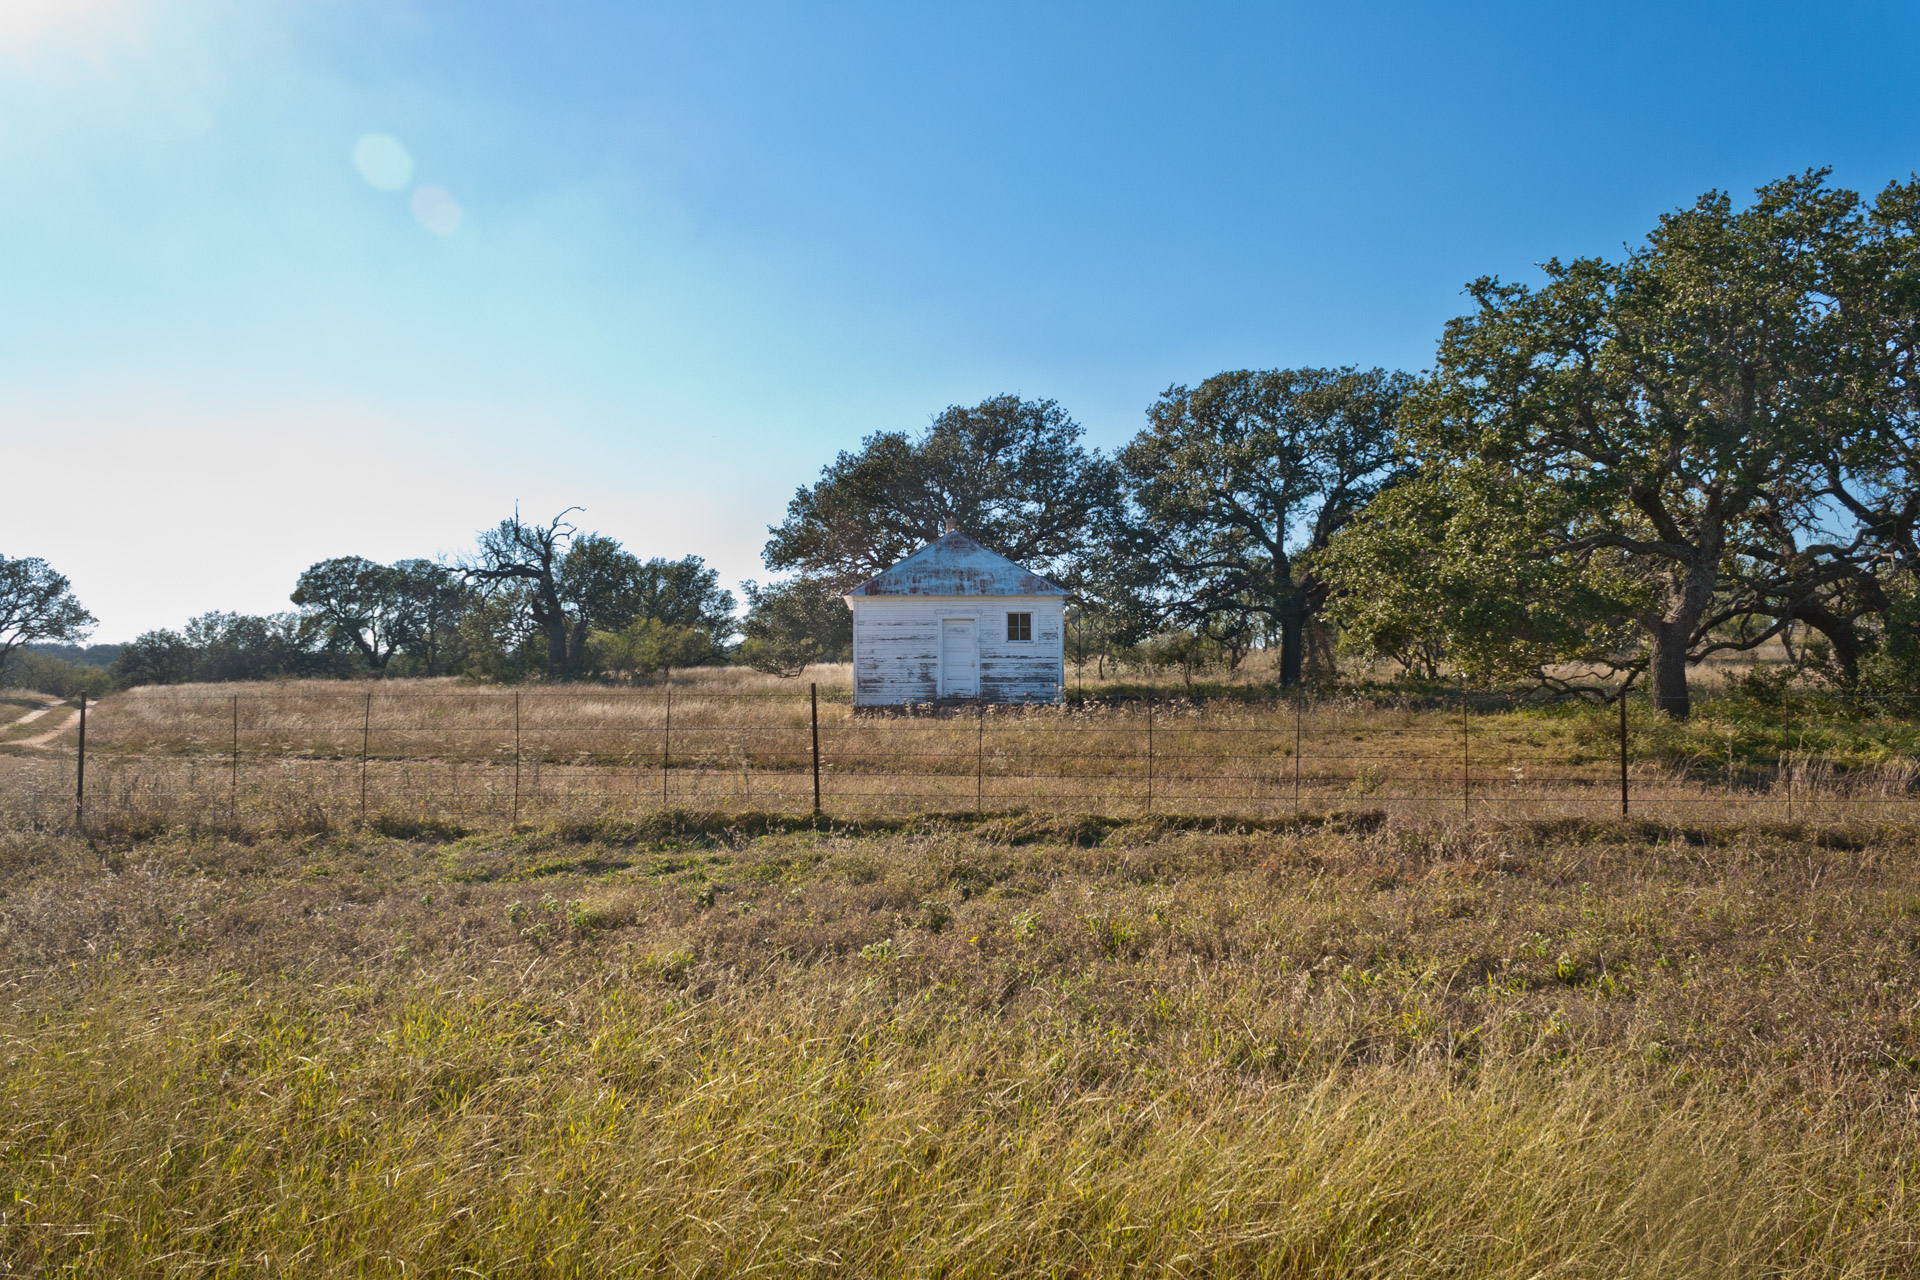 Fly Gap, Texas - The One-Room Schoolhouse (side addition)